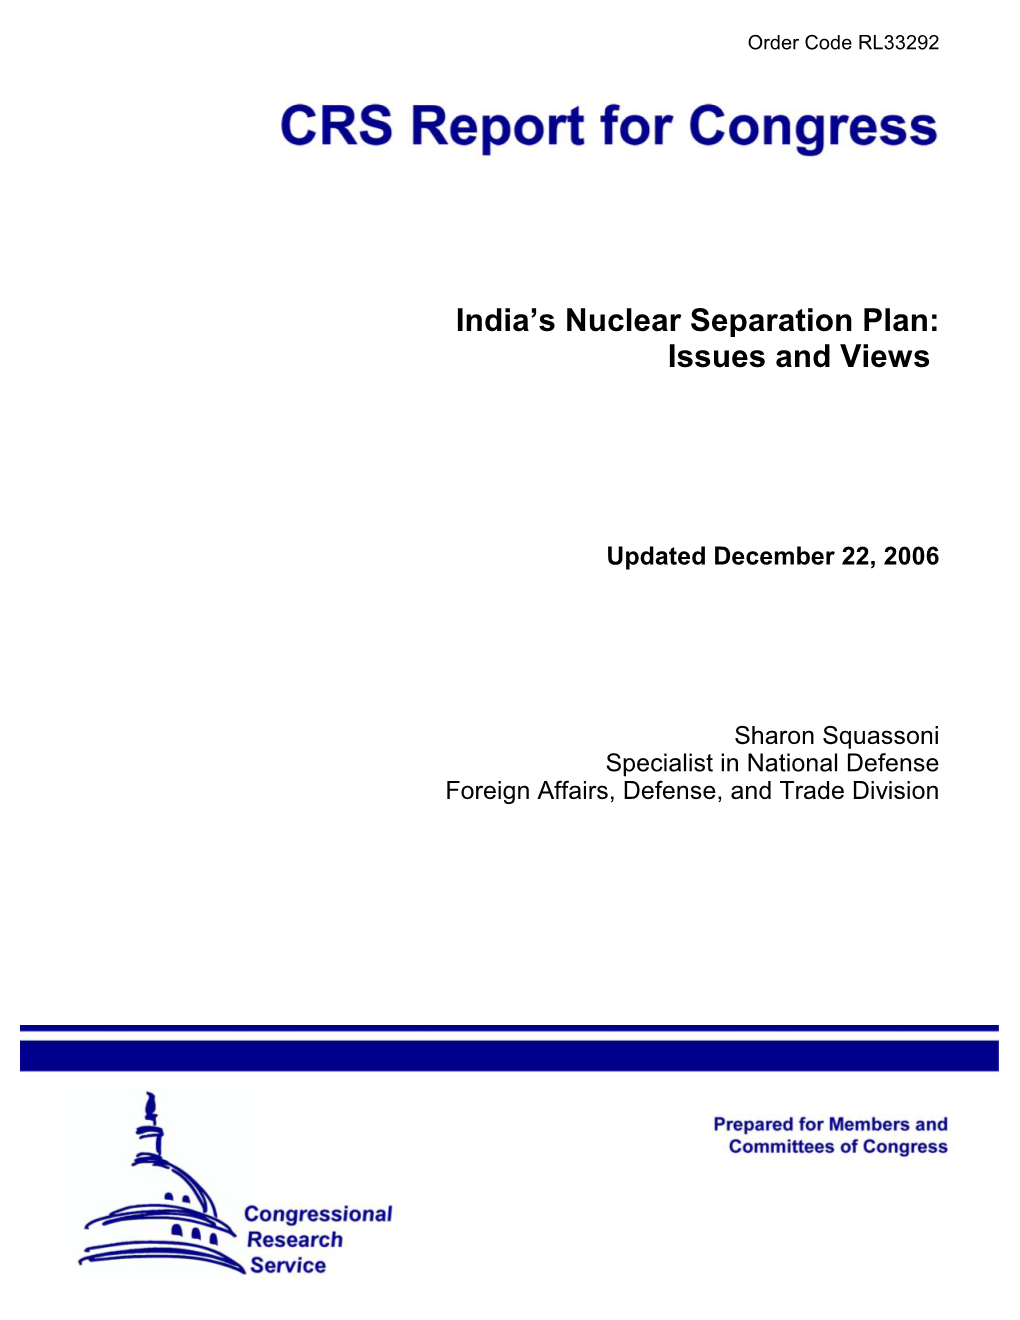 India's Nuclear Separation Plan